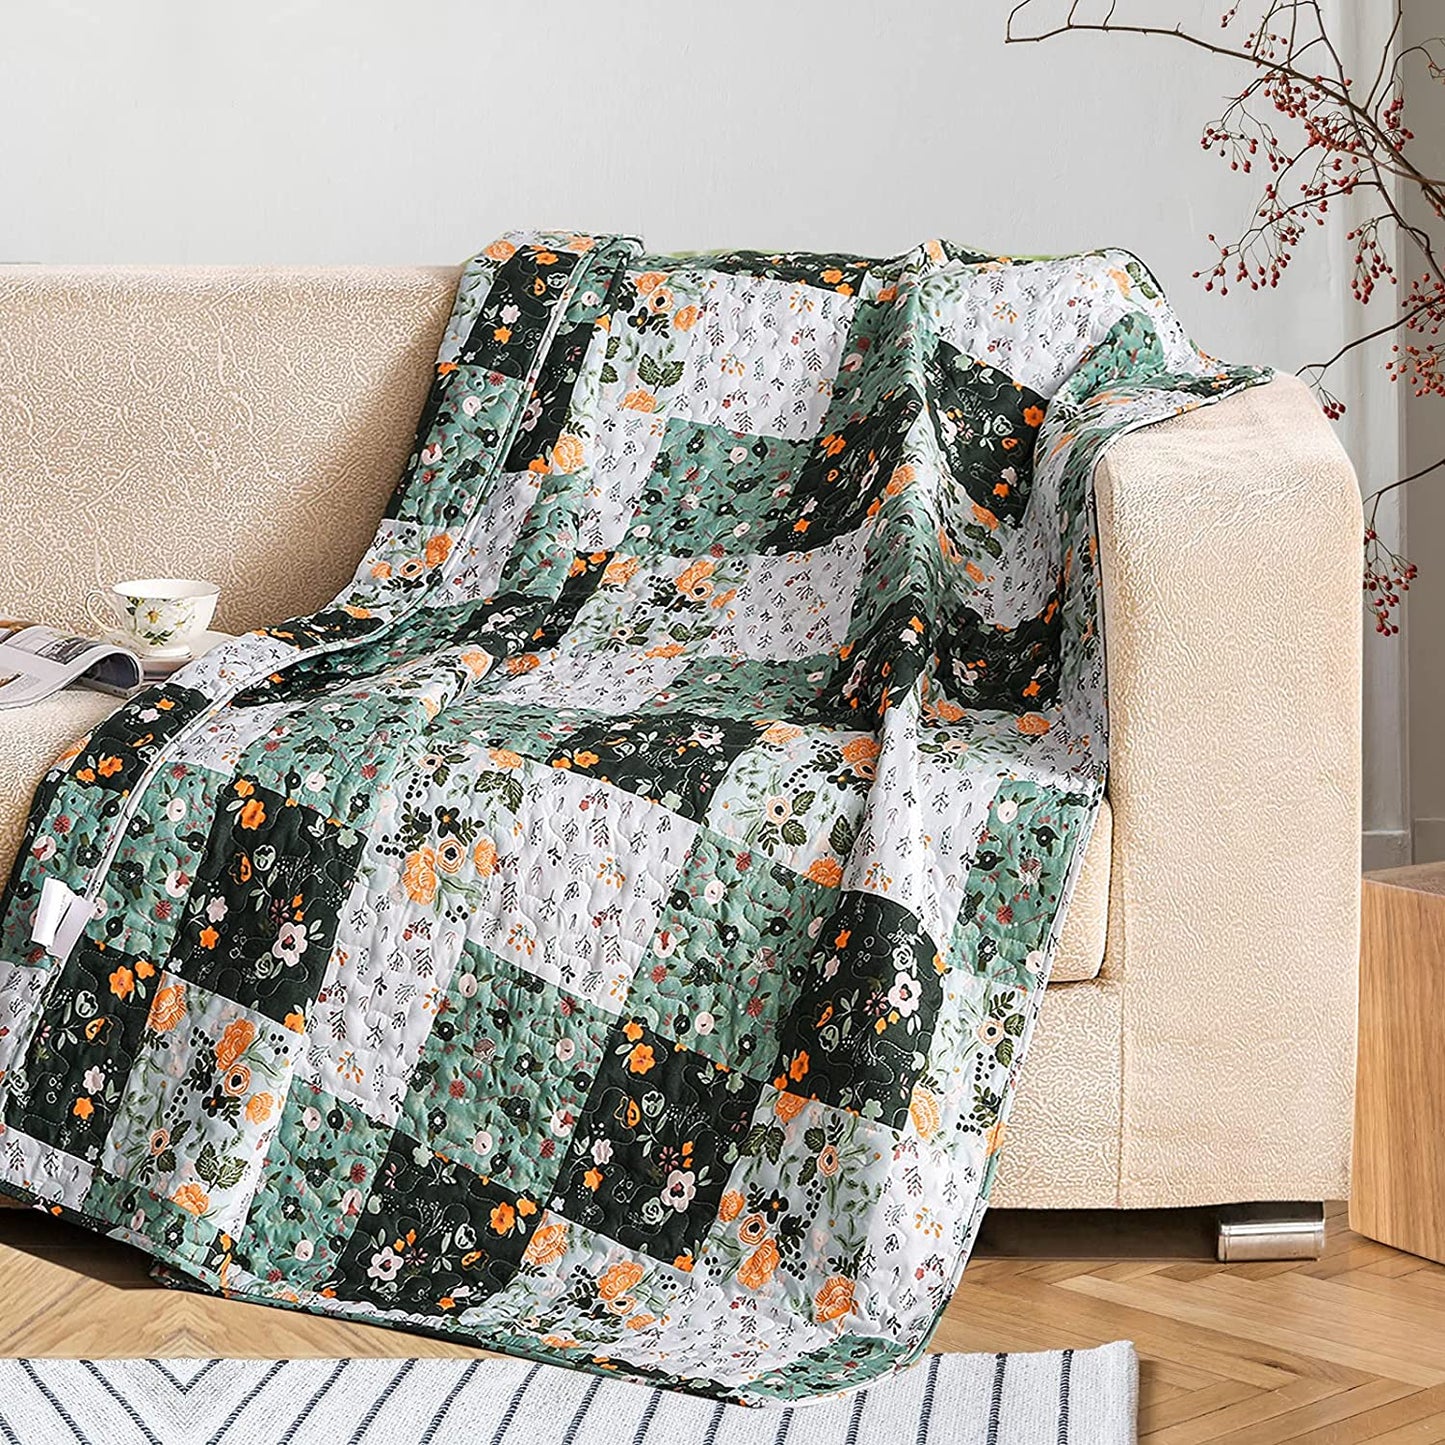 WONGS BEDDING Boho Patchwork Pattern Quilted Throw Blanket